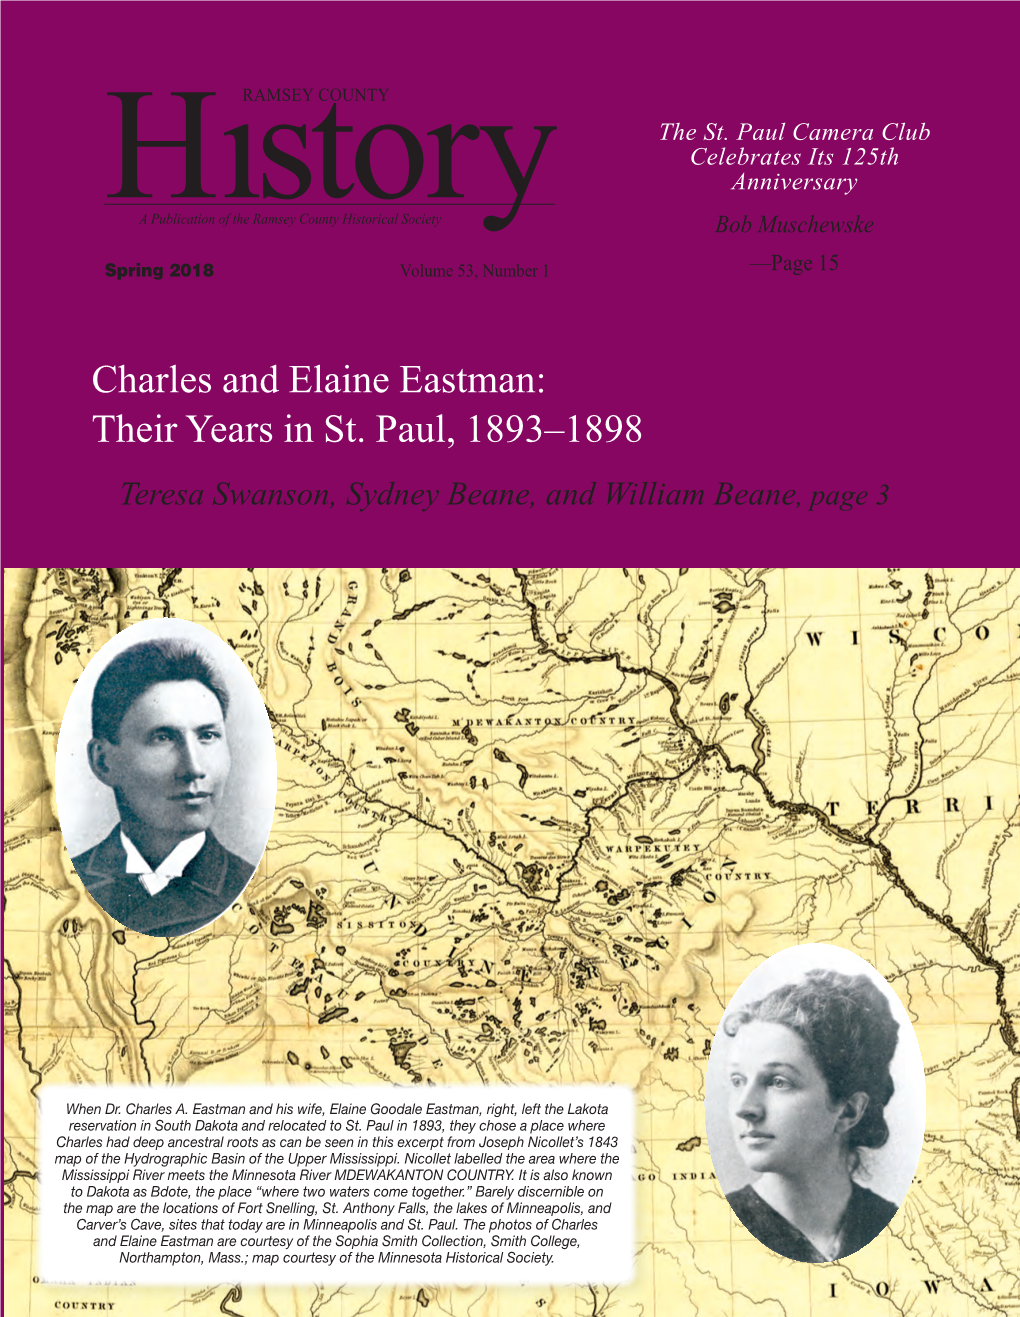 Charles and Elaine Eastman: Their Years in St